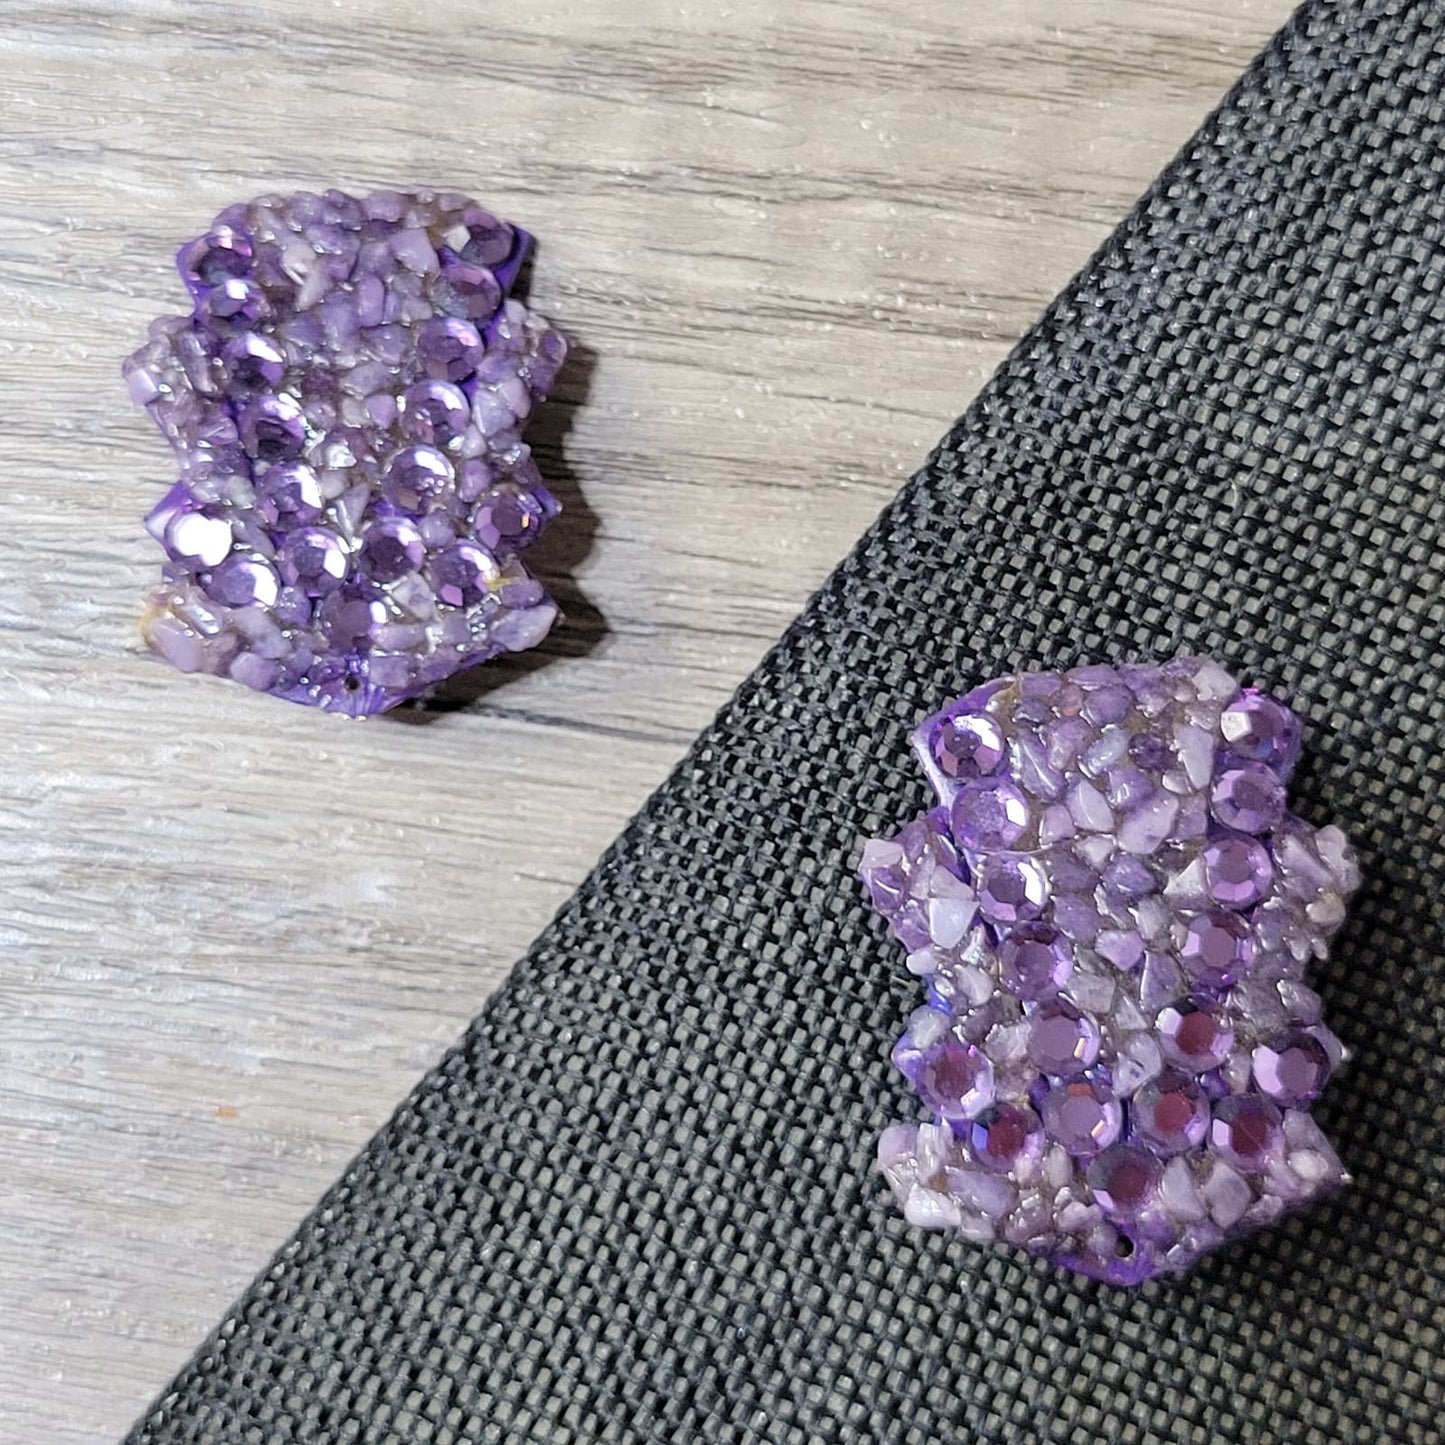 1980s Art Deco revival jeweled pierced earrings, amethyst stone chips and purple acrylic,